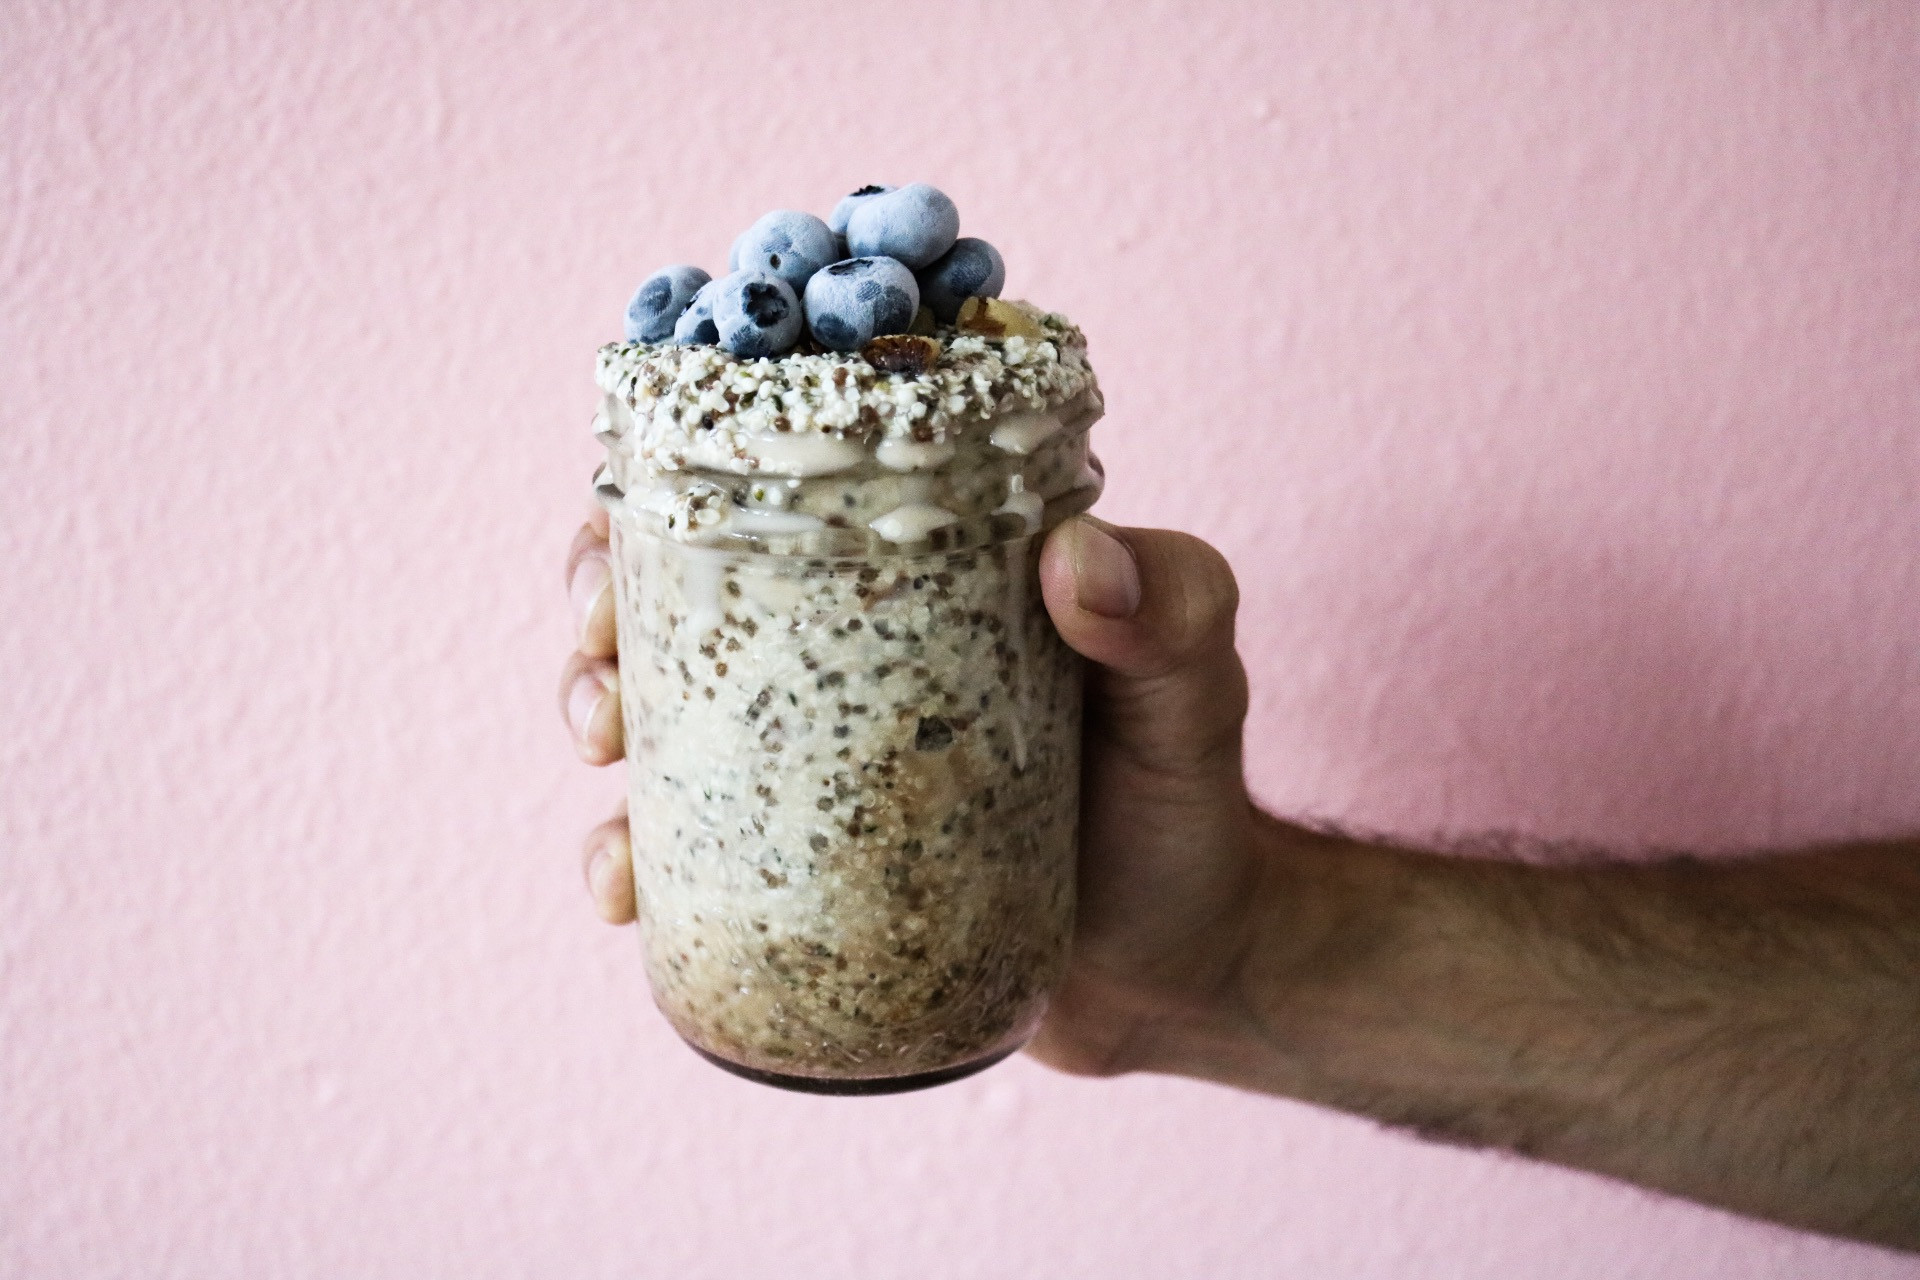 Keto Overnight Oats
 Keto Overnight Oats with Coconut and Blueberries